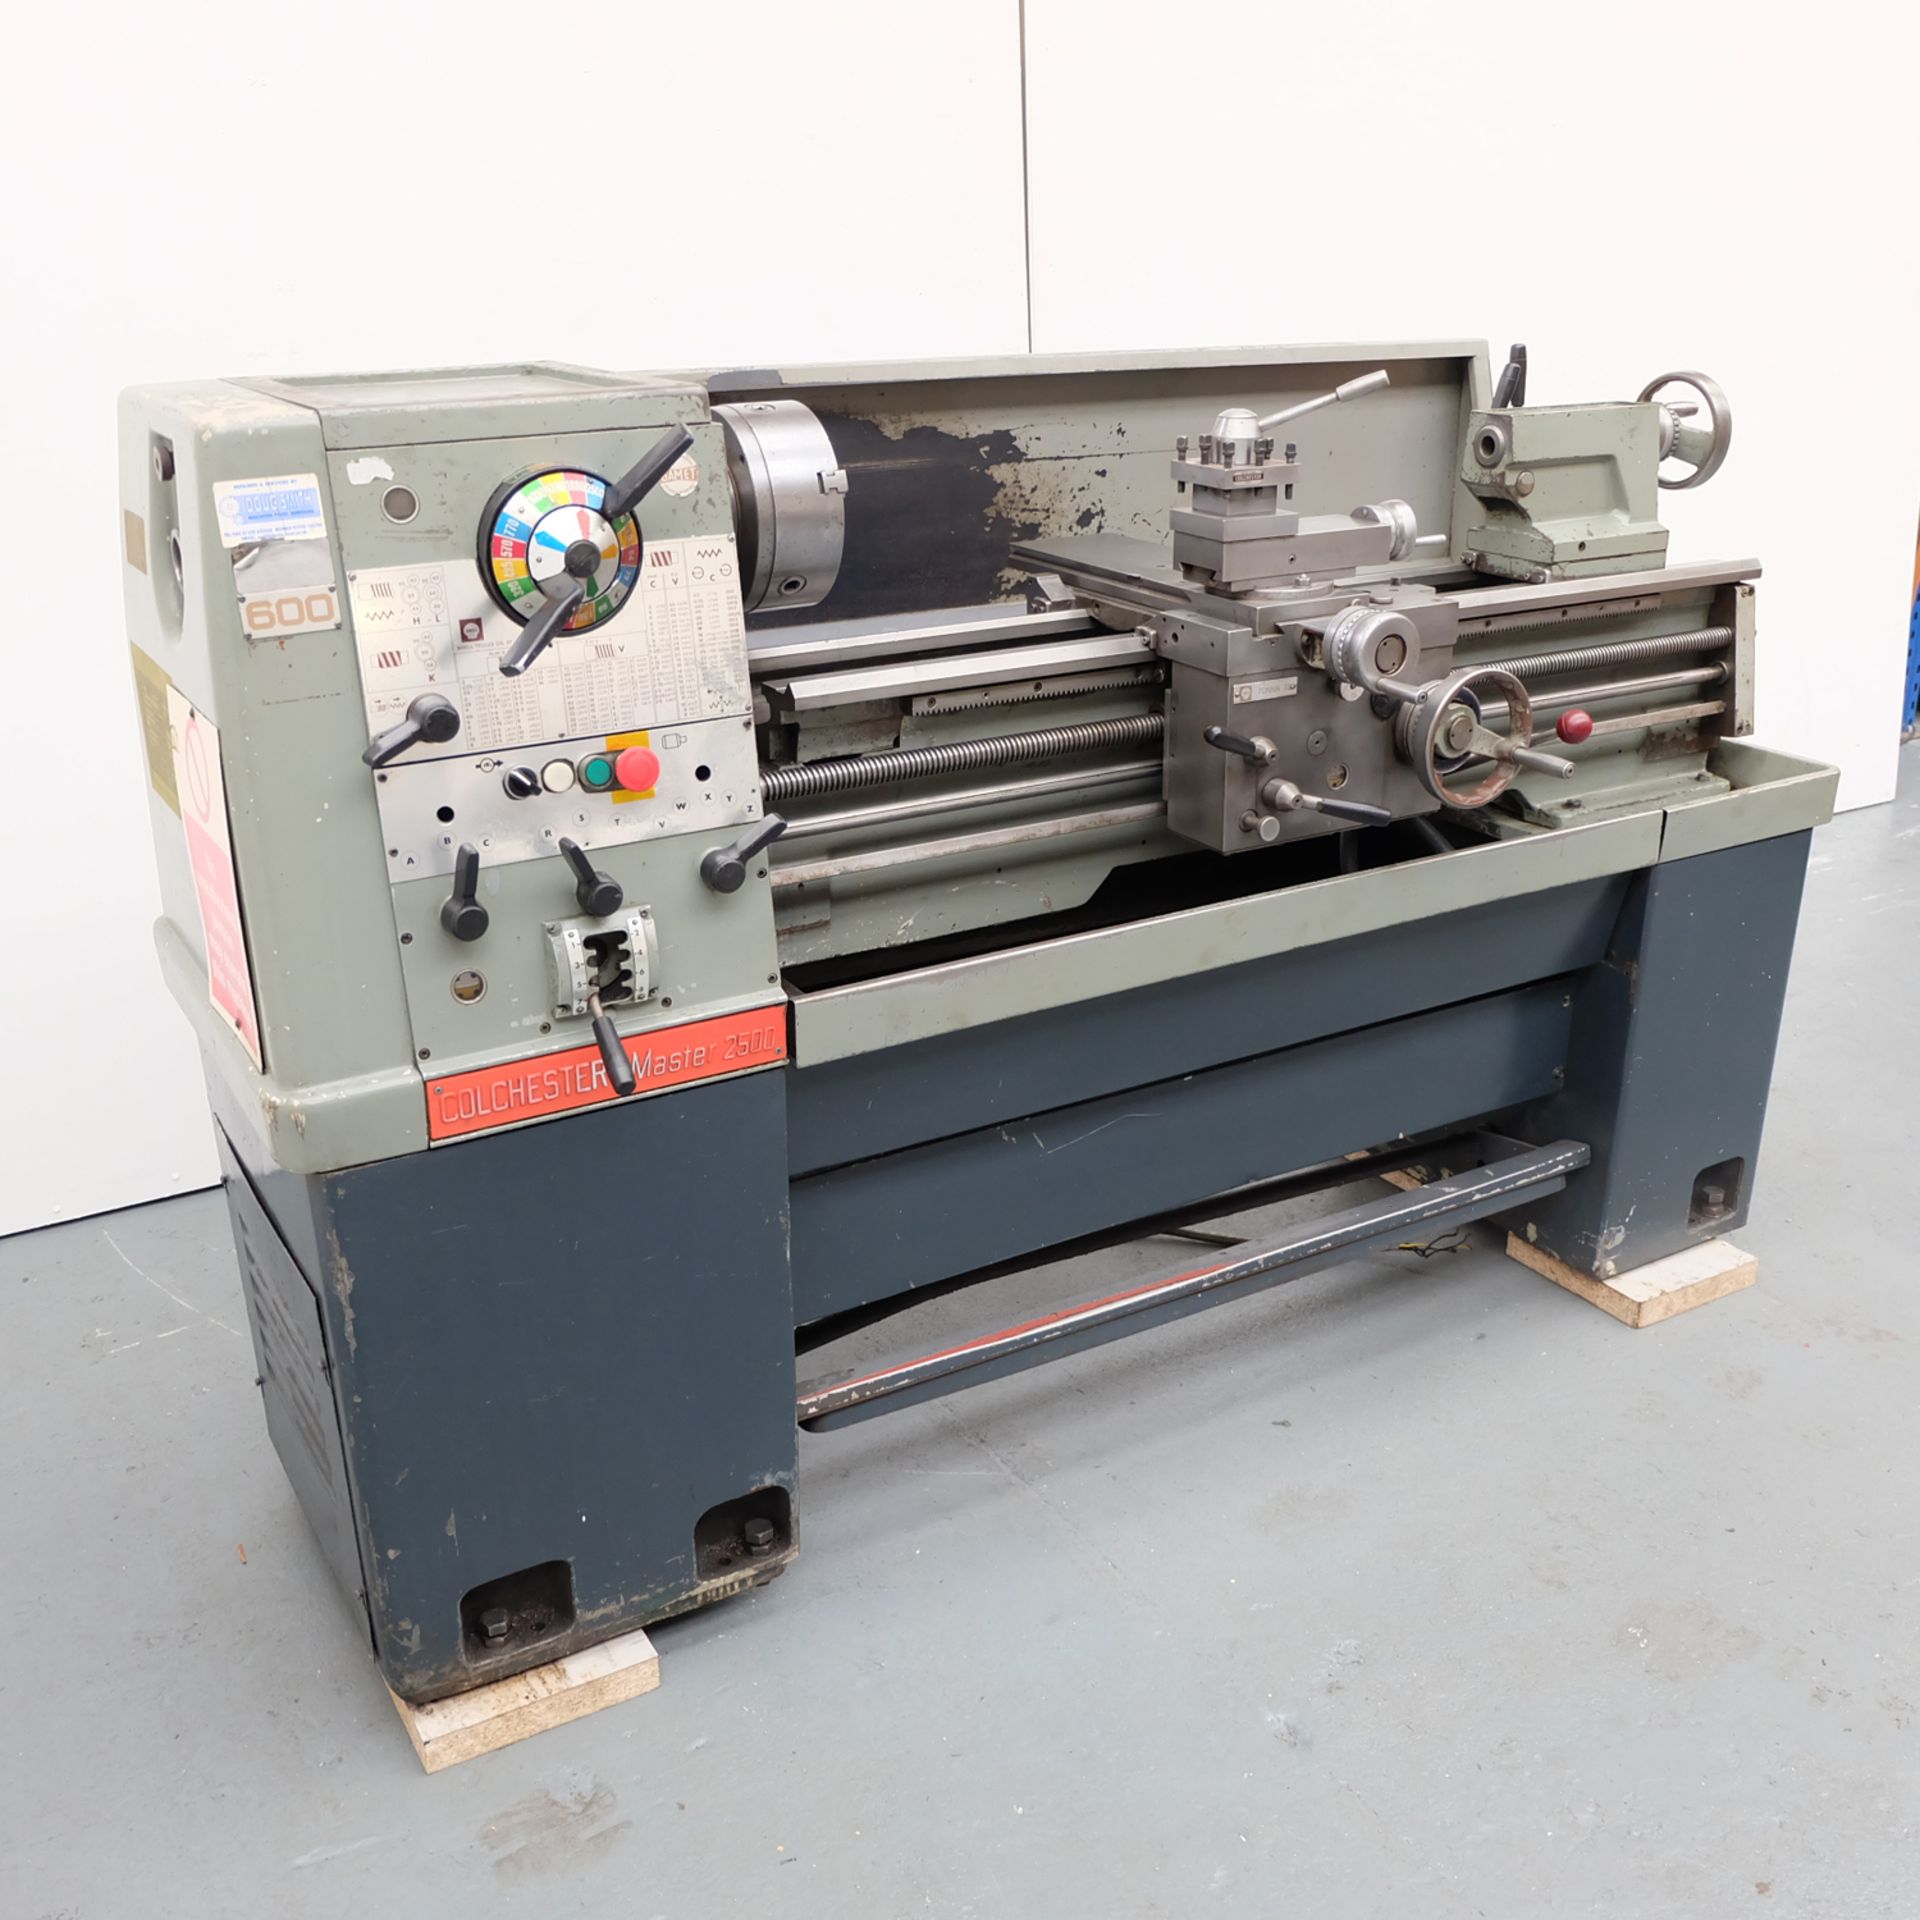 Colchester Master 2500 Gap Bed Centre Lathe. Height of Centres 6 1/2". Swing Over Bed 13 1/4". - Image 3 of 10